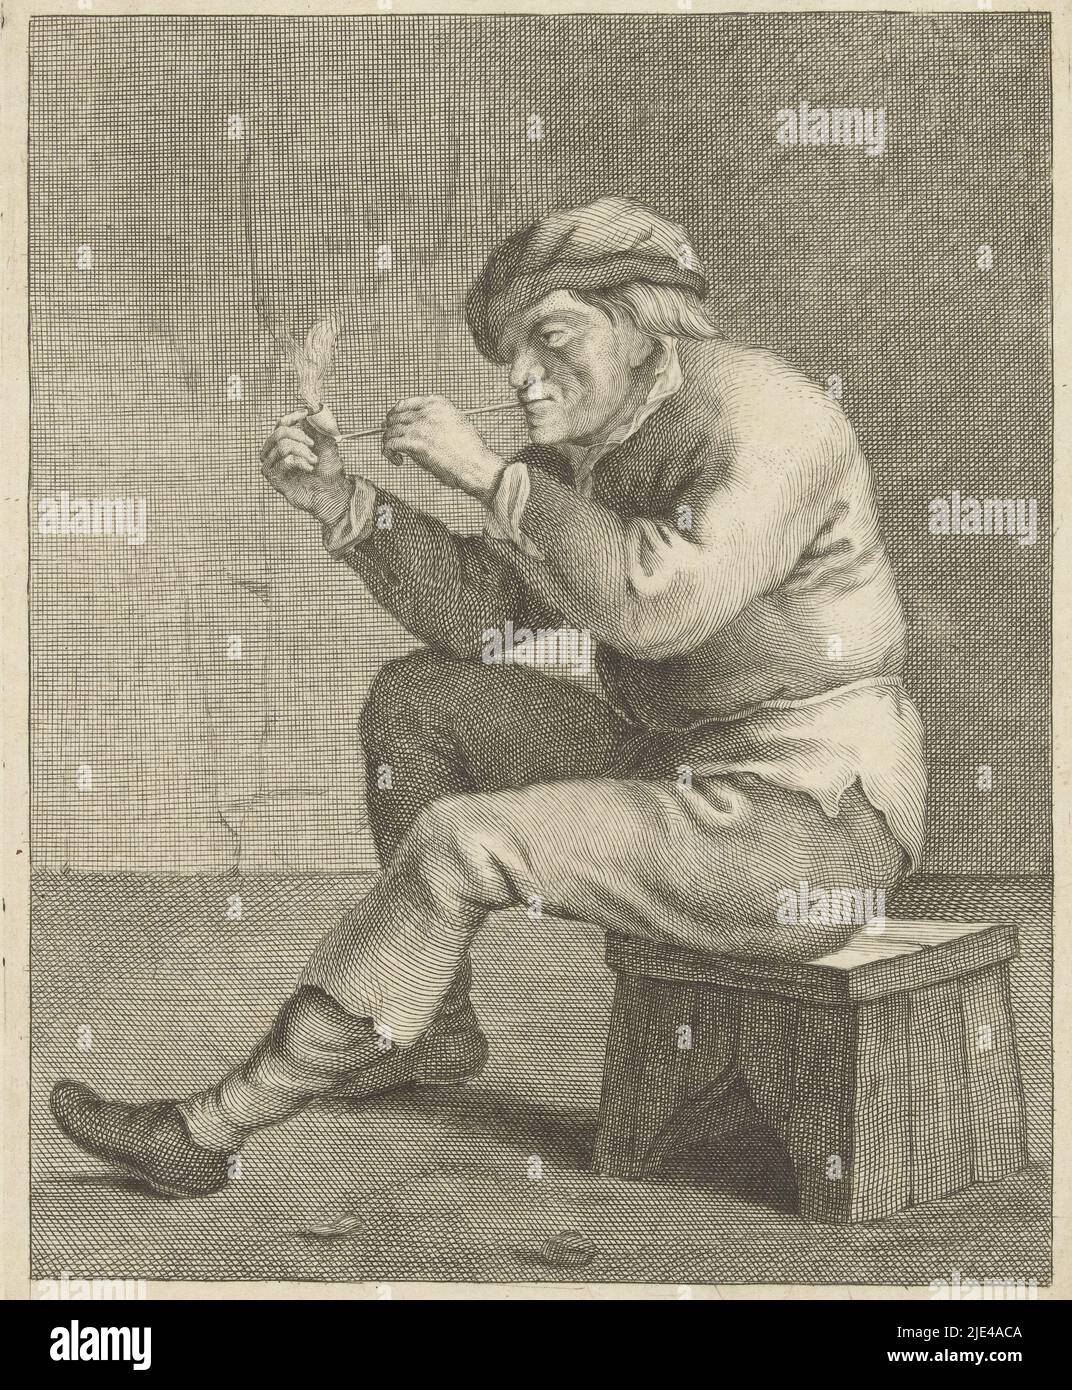 Man smoking pipe sitting on a stool, Abraham Delfos, after Adriaen Brouwer, after David Teniers, 1741 - 1820, print maker: Abraham Delfos, after: Adriaen Brouwer, after: David Teniers, (rejected attribution), Leiden, 1741 - 1820, paper, engraving, etching, h 189 mm × w 146 mm Stock Photo